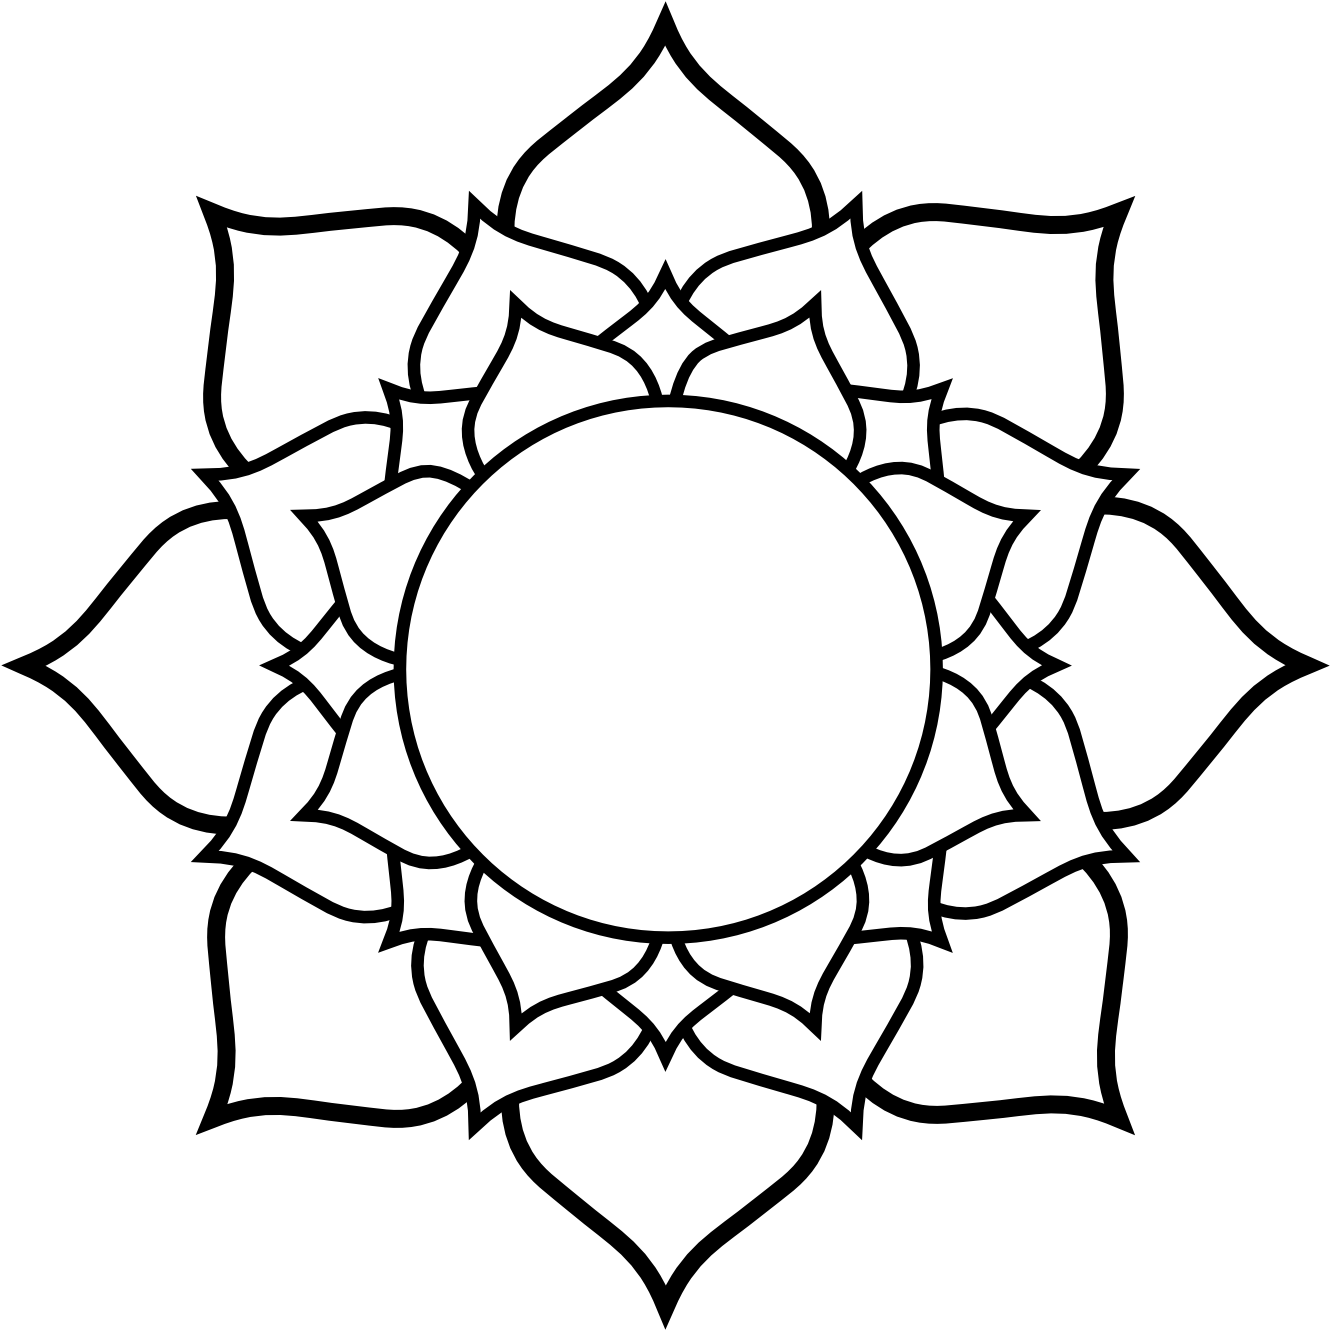 How To Draw Lotus Flower Top View